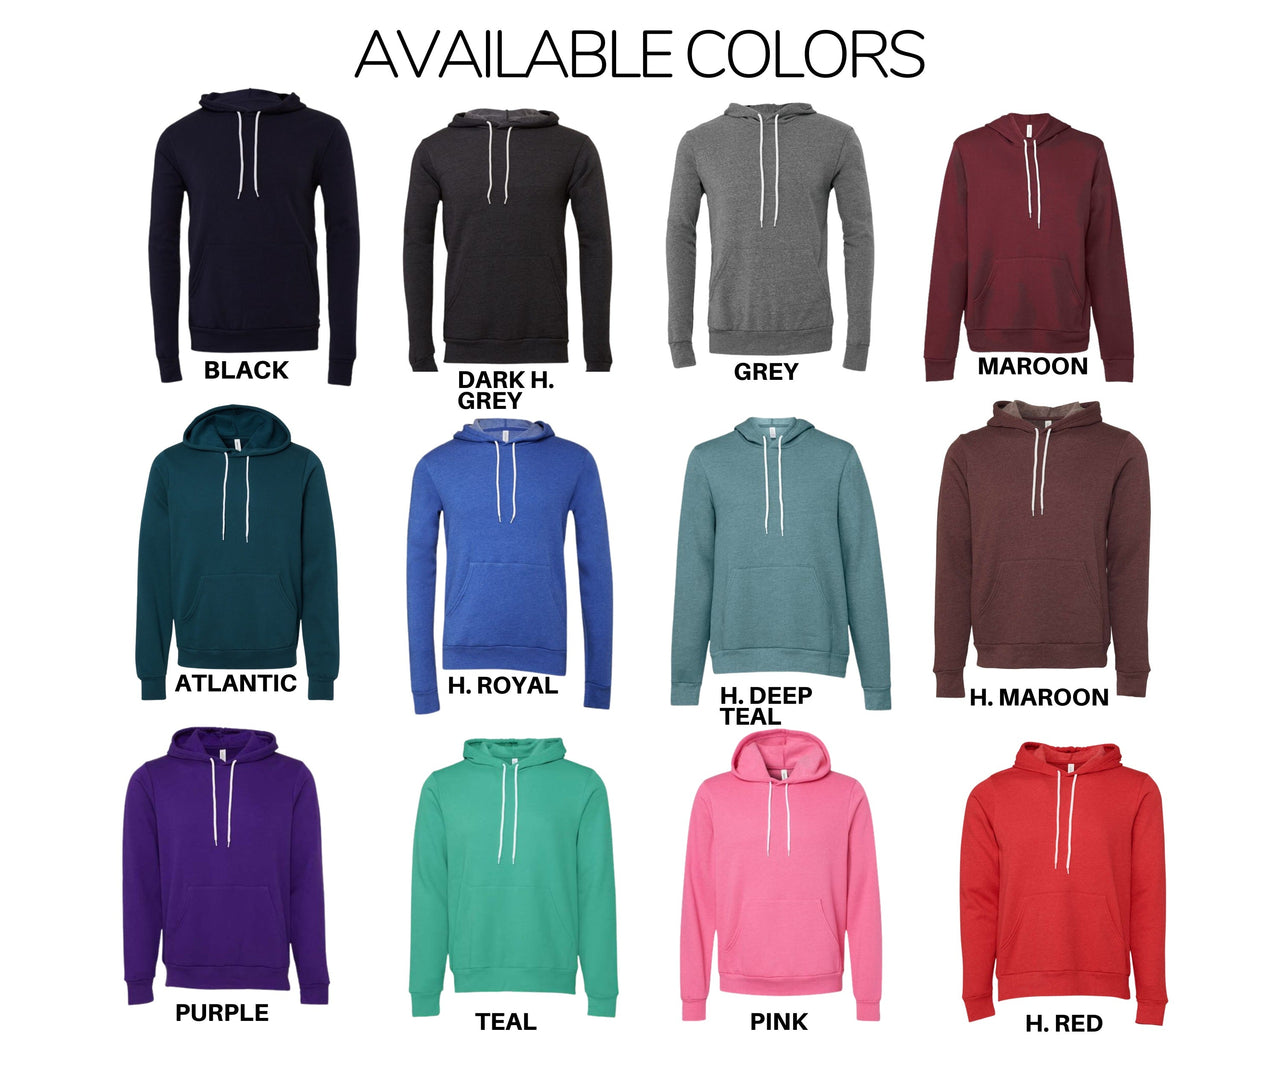 Adult - Unisex Hooded Pullover Sweatshirt (Volleyball Game Day)